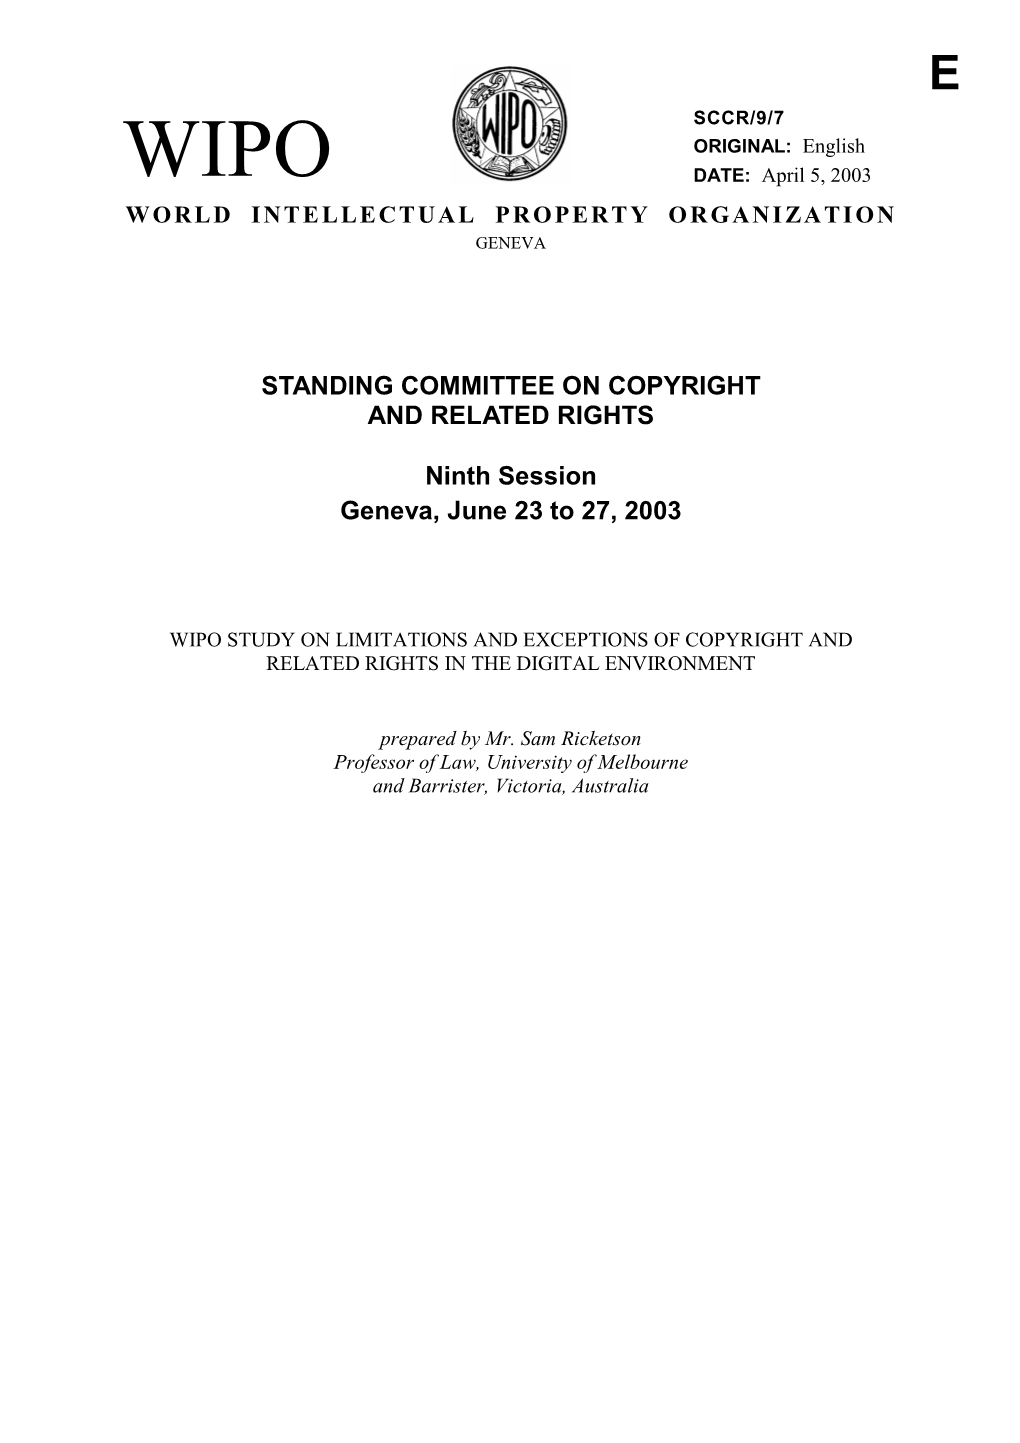 Study on Limitations and Exceptions of Copyright and Related Rights In